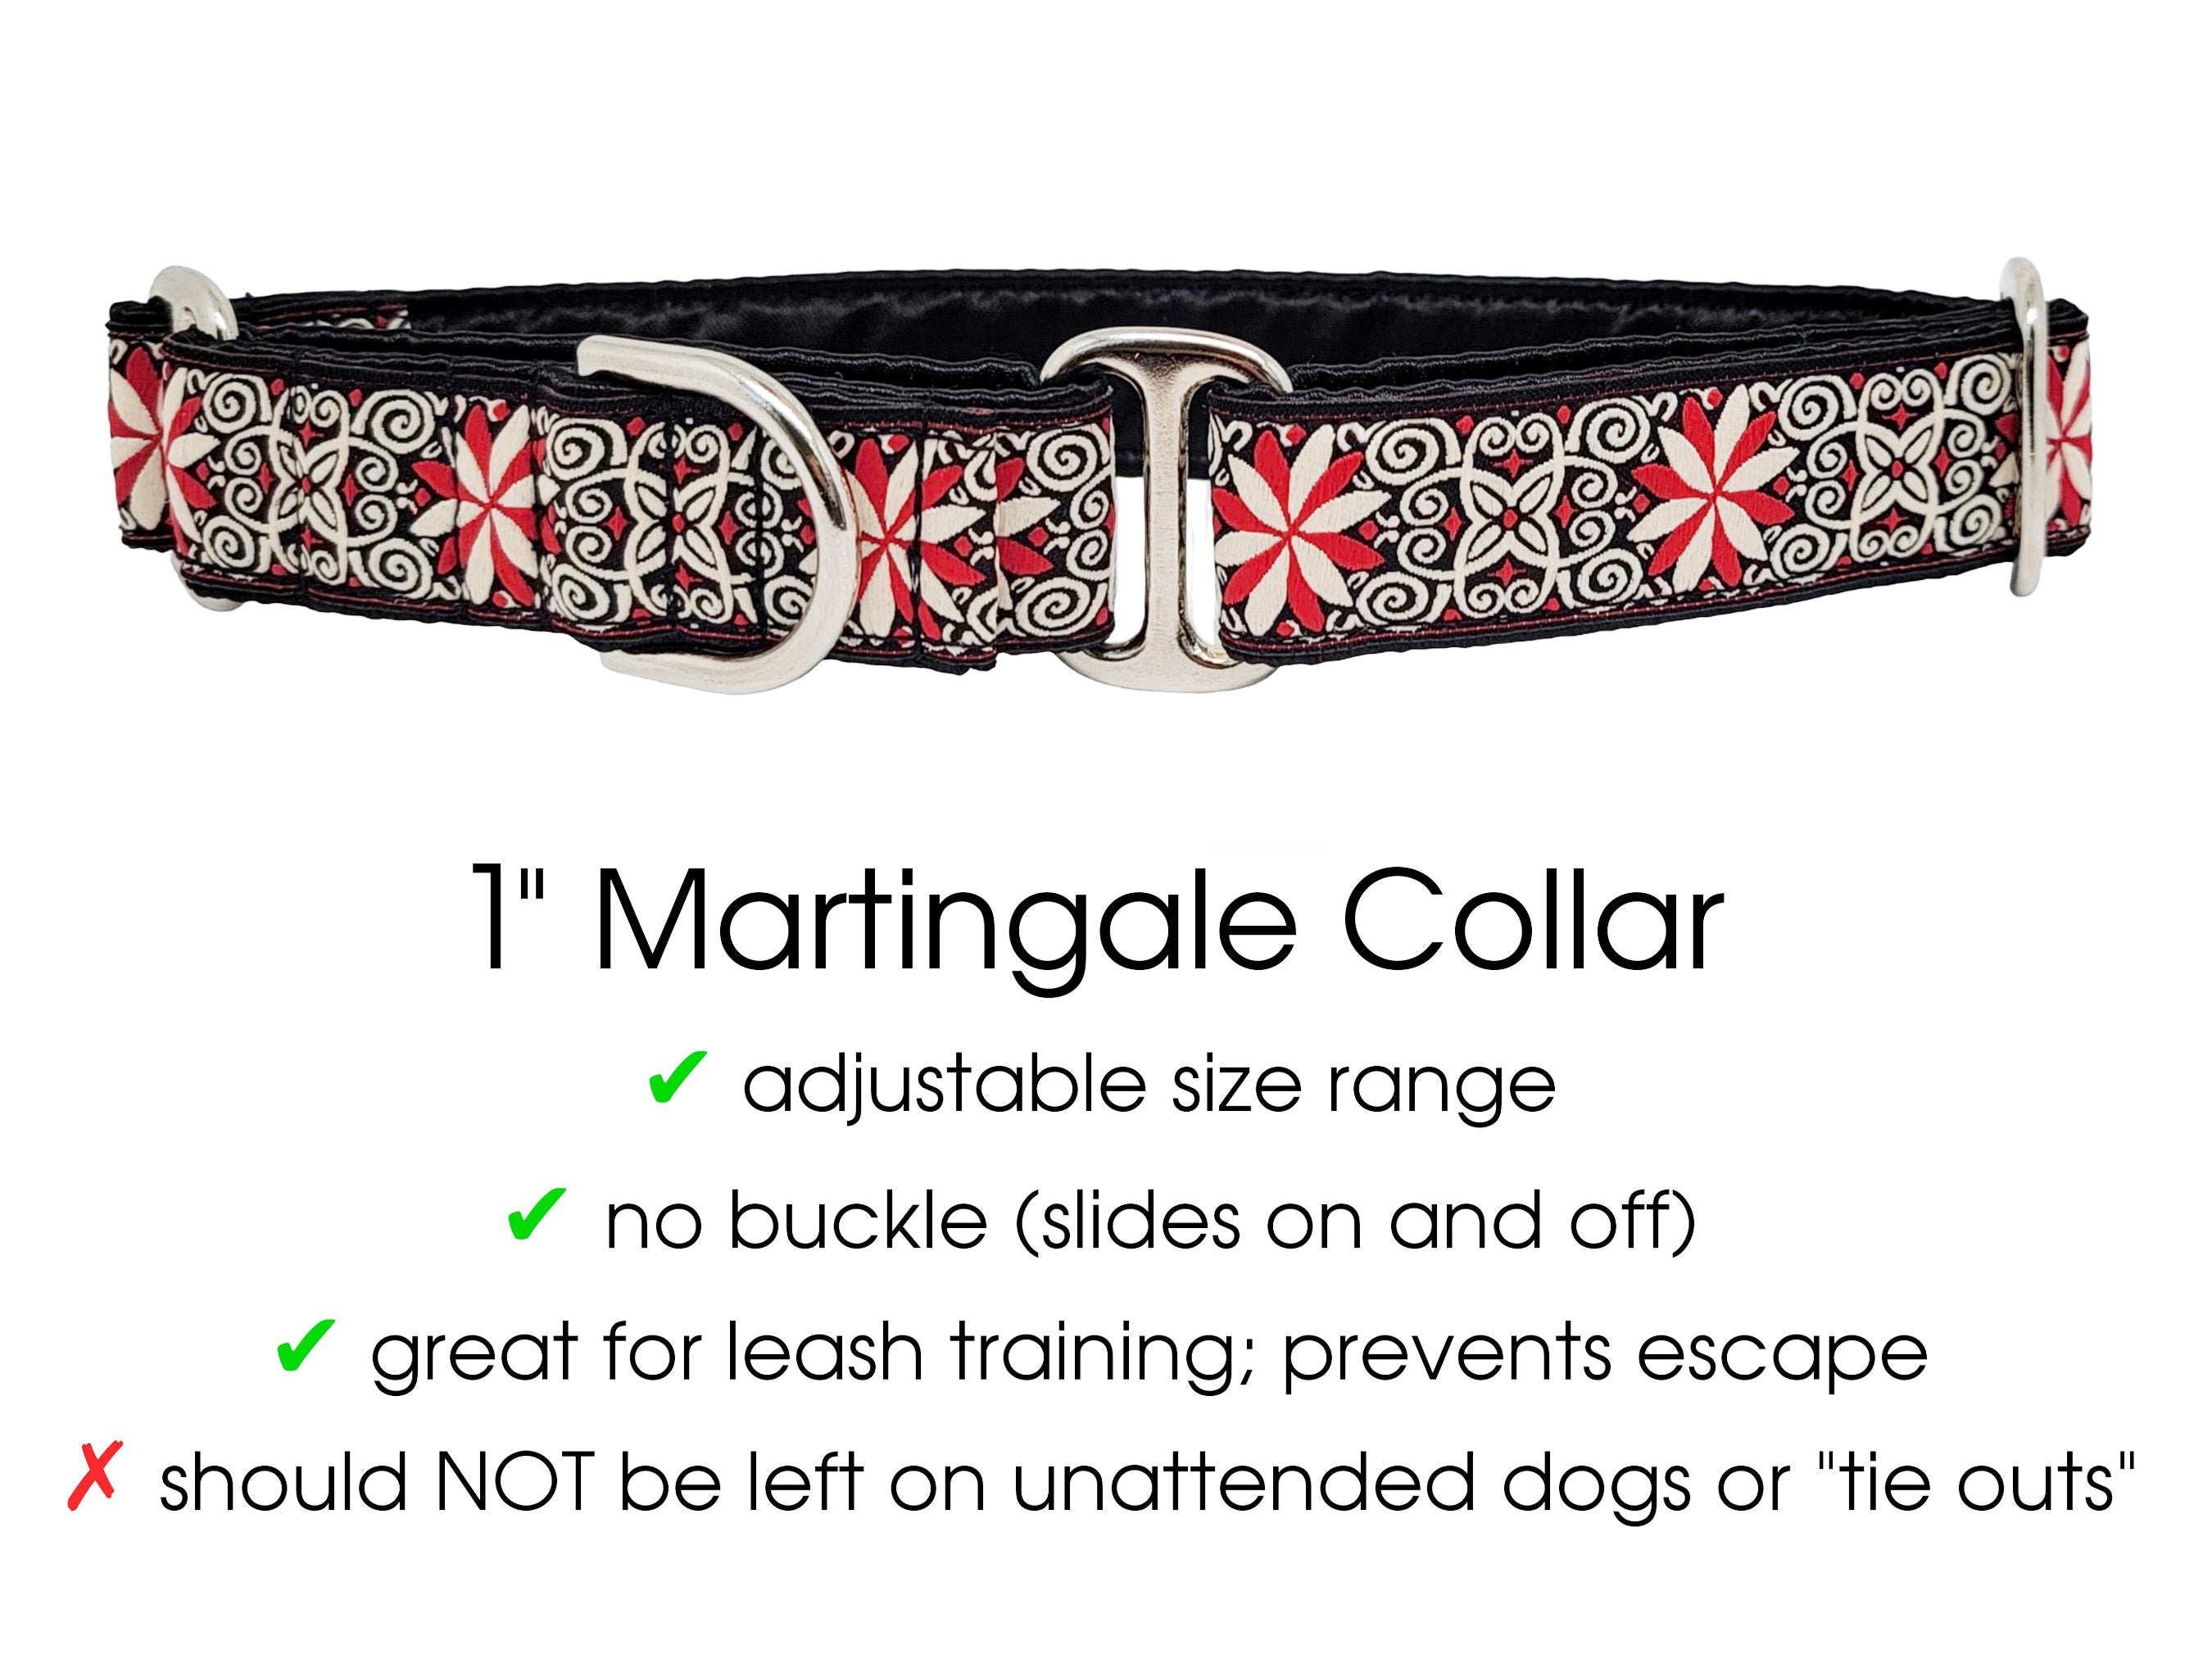 Arabesque Jacquard in Red & White - Martingale Dog Collar or Buckle Dog Collar - 1" Width